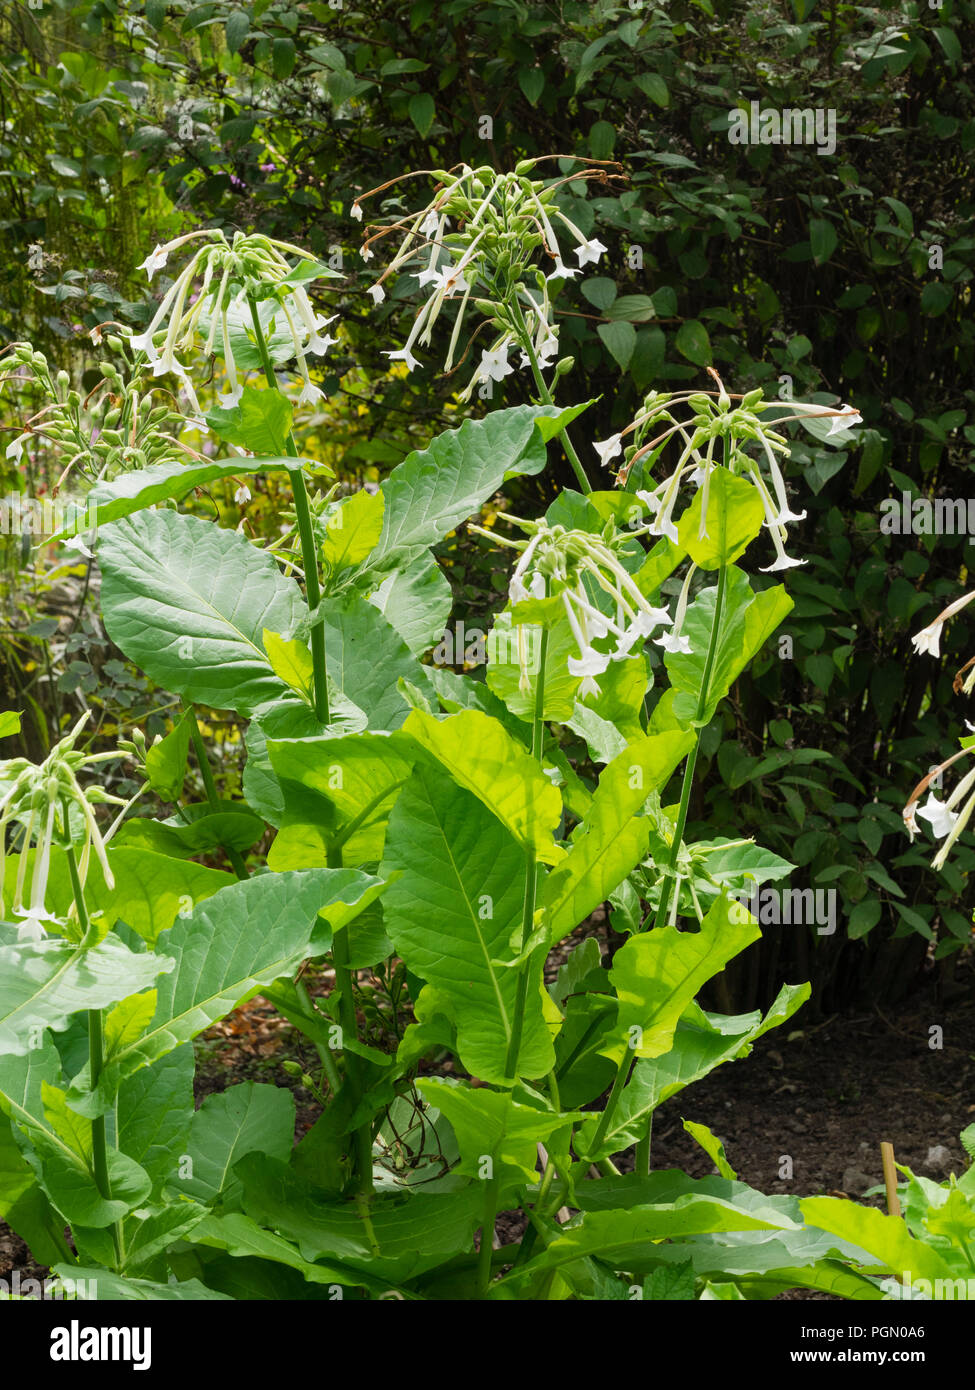 Scented, tubular white flowers of the tender biennial tobacco plant, Nicotiana sylvestris Stock Photo